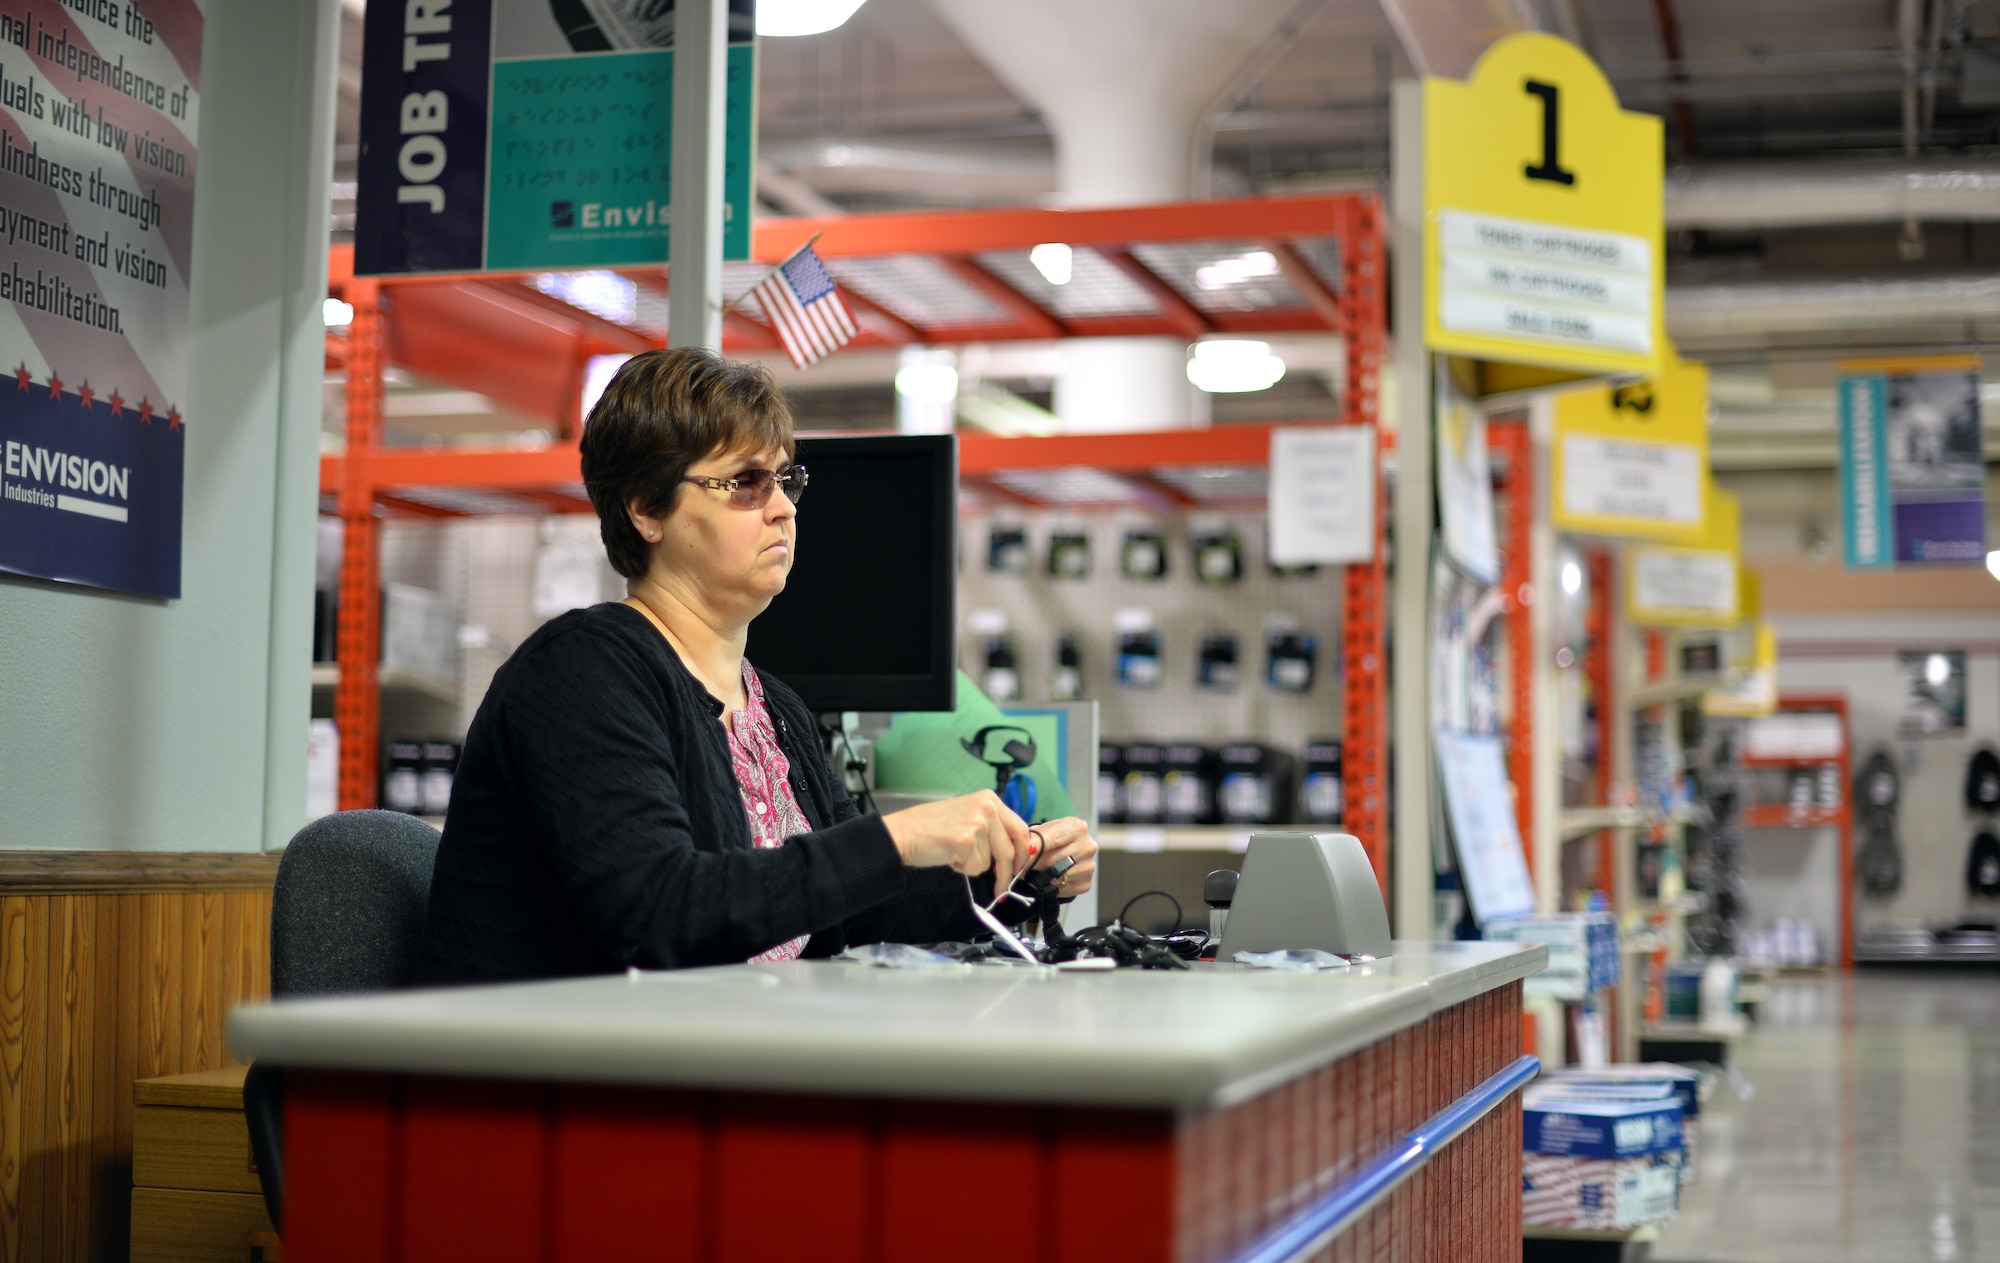 Deb Iwanksi tags merchandise Nov. 9, 2015 at the Envision Xpress store, Offutt Air Force Base, Neb. Iwasnki has been working for the store for eight months. (U.S Air Force photo by Josh Plueger)